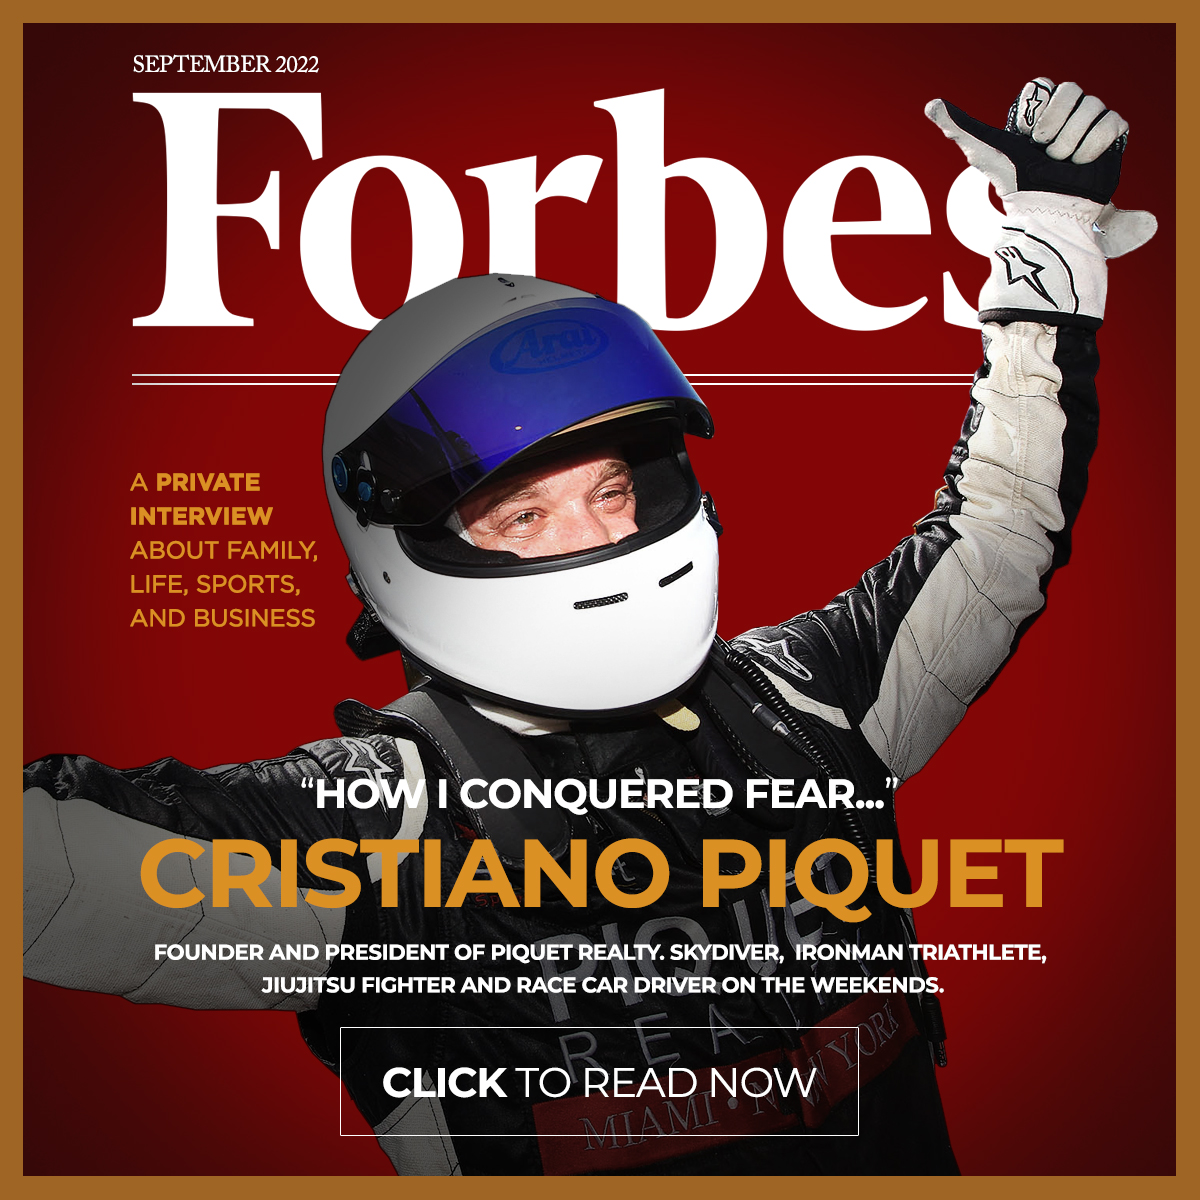 EXCLUSIVE FORBES INTERVIEW WITH CRISTIANO PIQUET